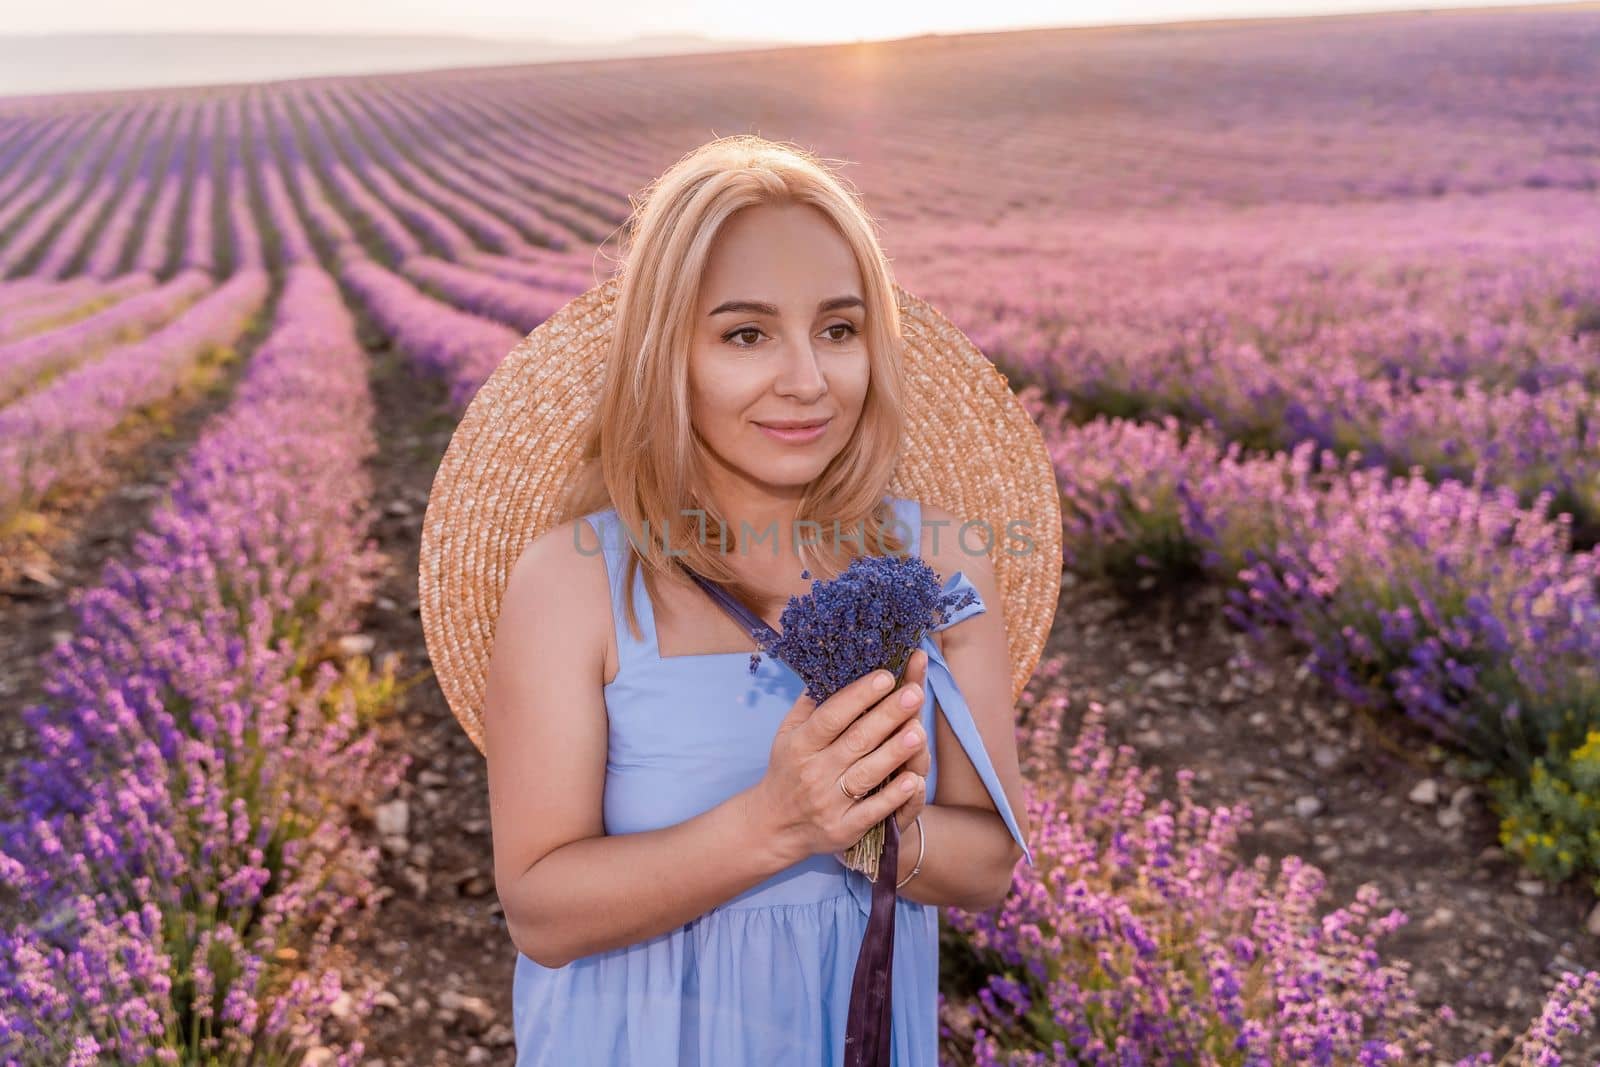 Woman lavender field sunset. Romantic woman walks through the lavender fields. illuminated by sunset sunlight. She is wearing a blue dress with a hat